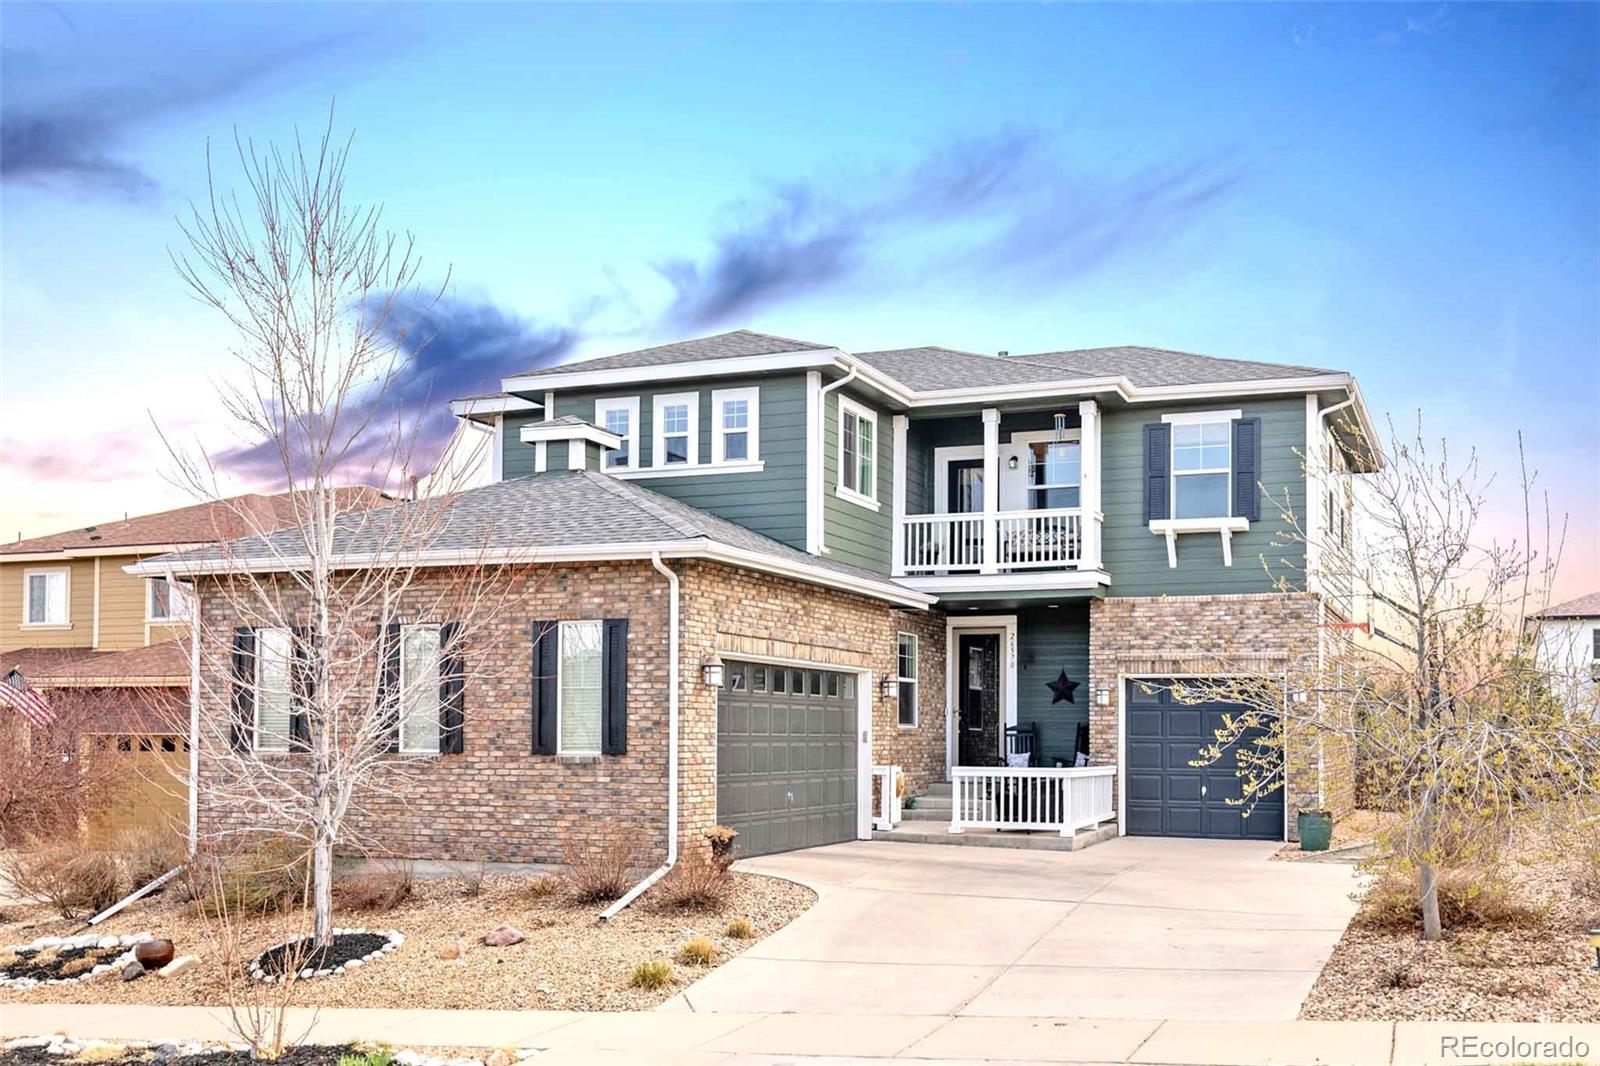 26570 e euclid place, Aurora sold home. Closed on 2024-06-03 for $785,000.